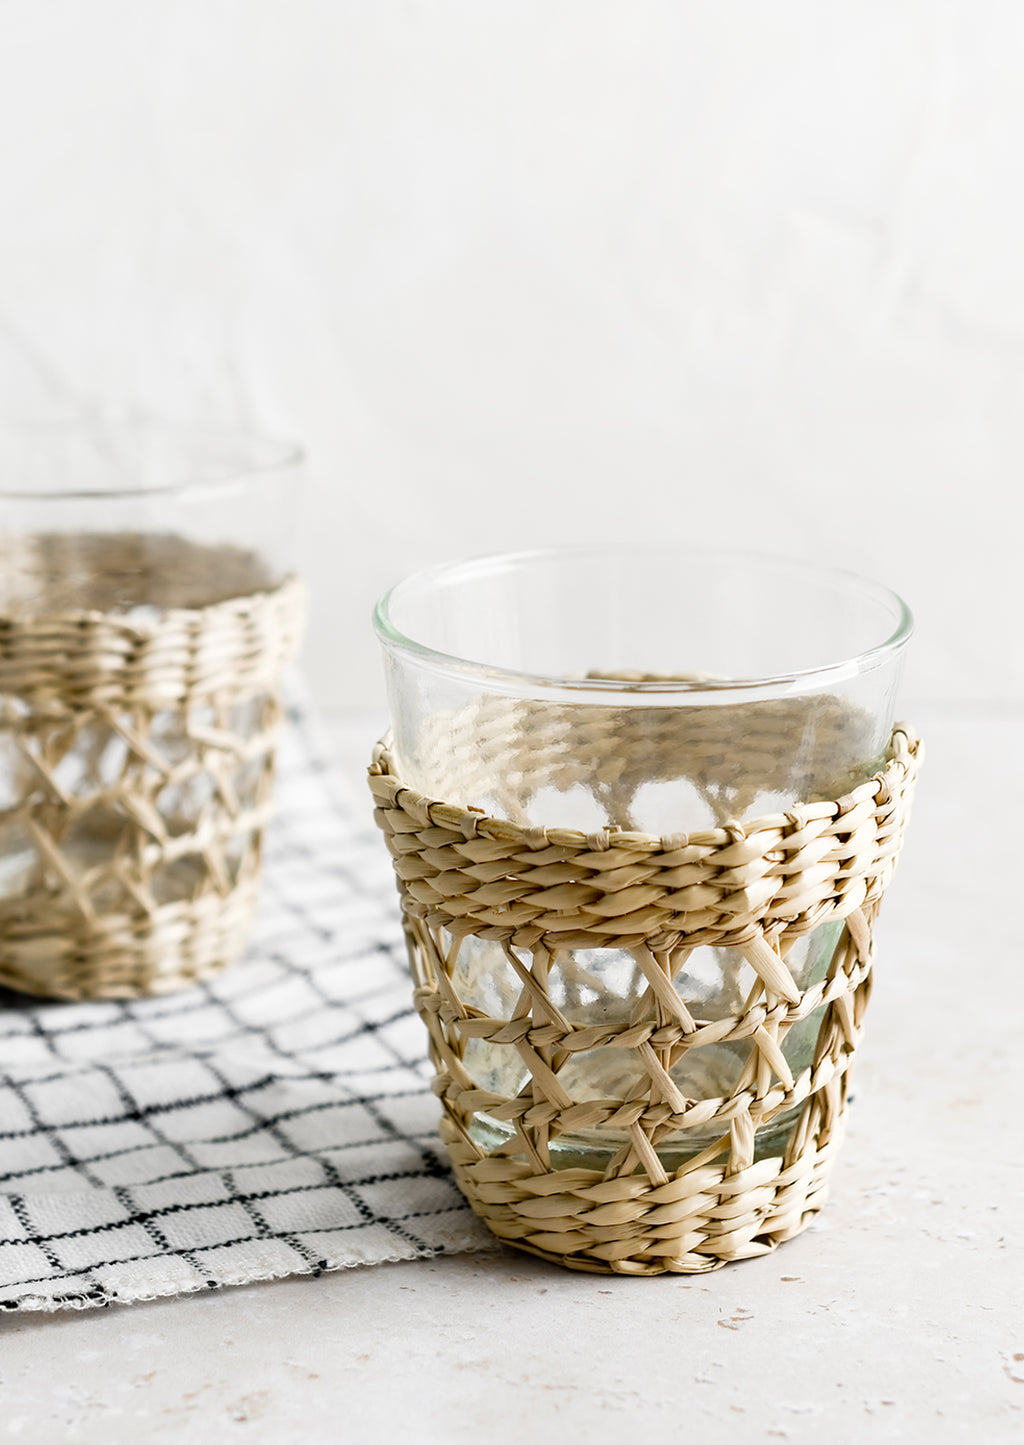 Small / 6 oz: Small glass cups wrapped in decorative seagrass cage.